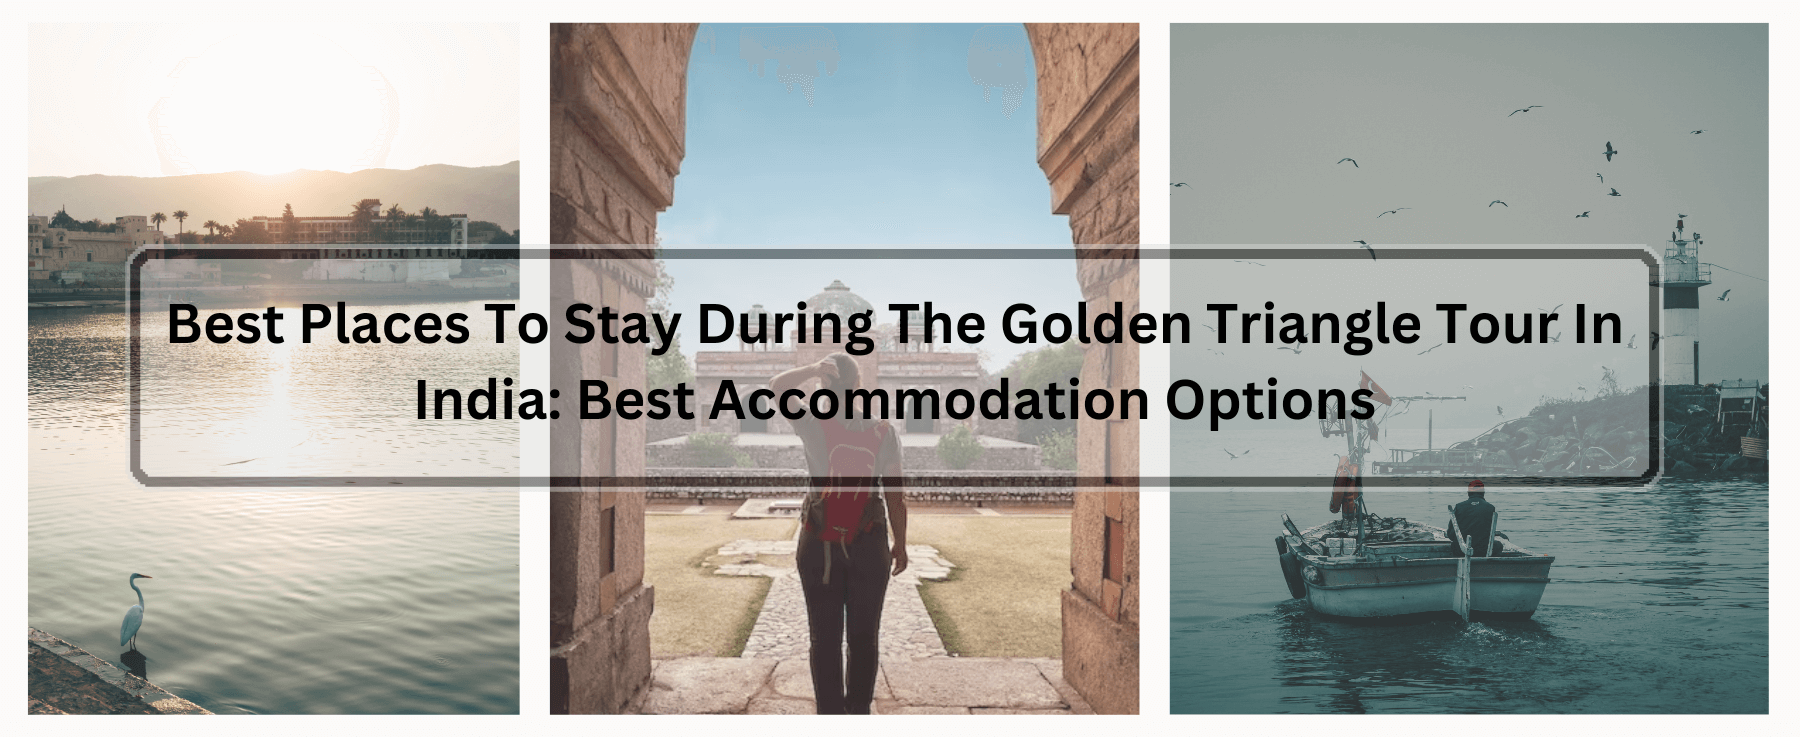 Best Places To Stay During The Golden Triangle Tour In India: Best Accommodation Options